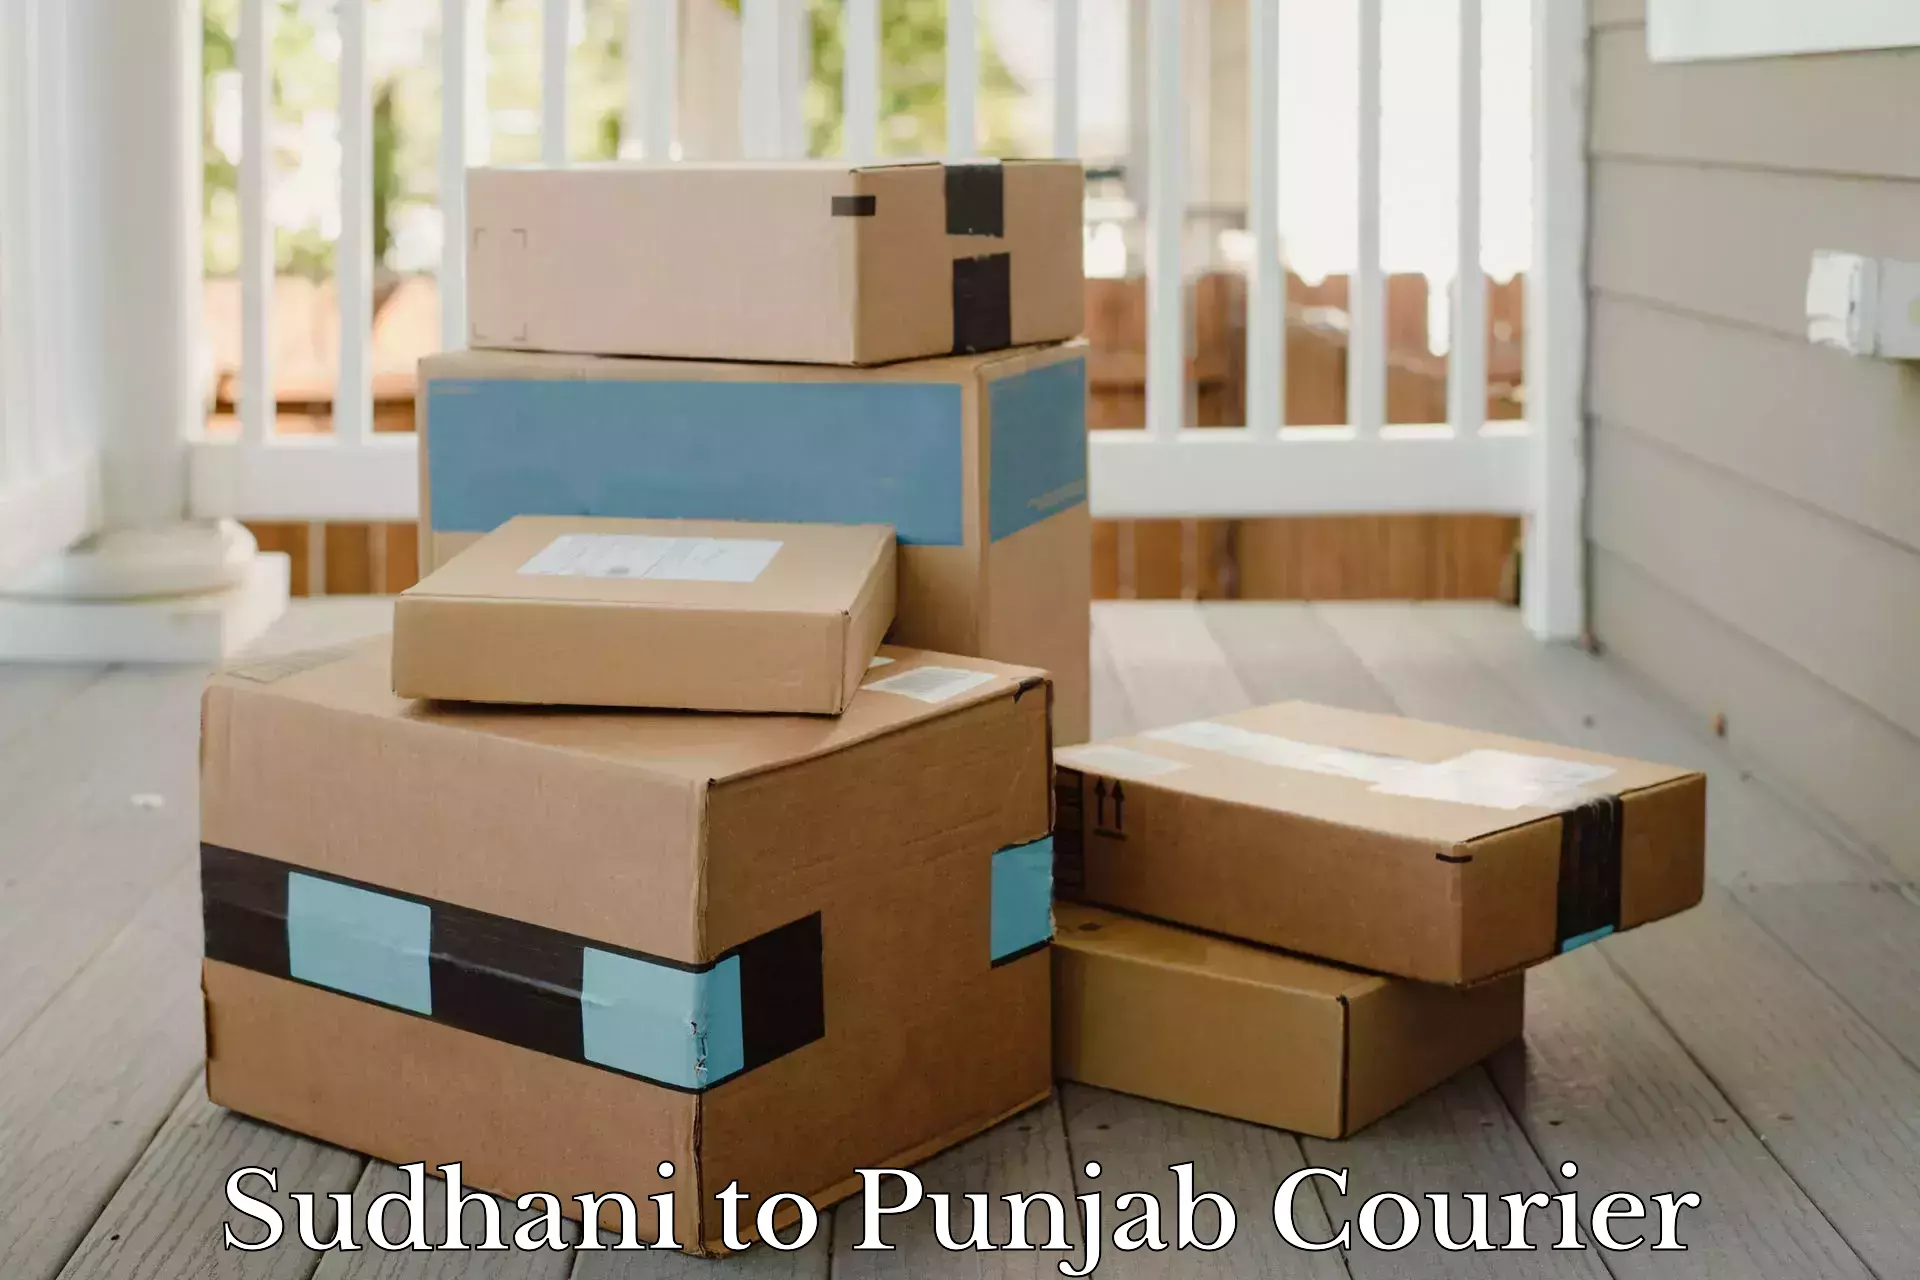 Package delivery network Sudhani to Sirhind Fatehgarh